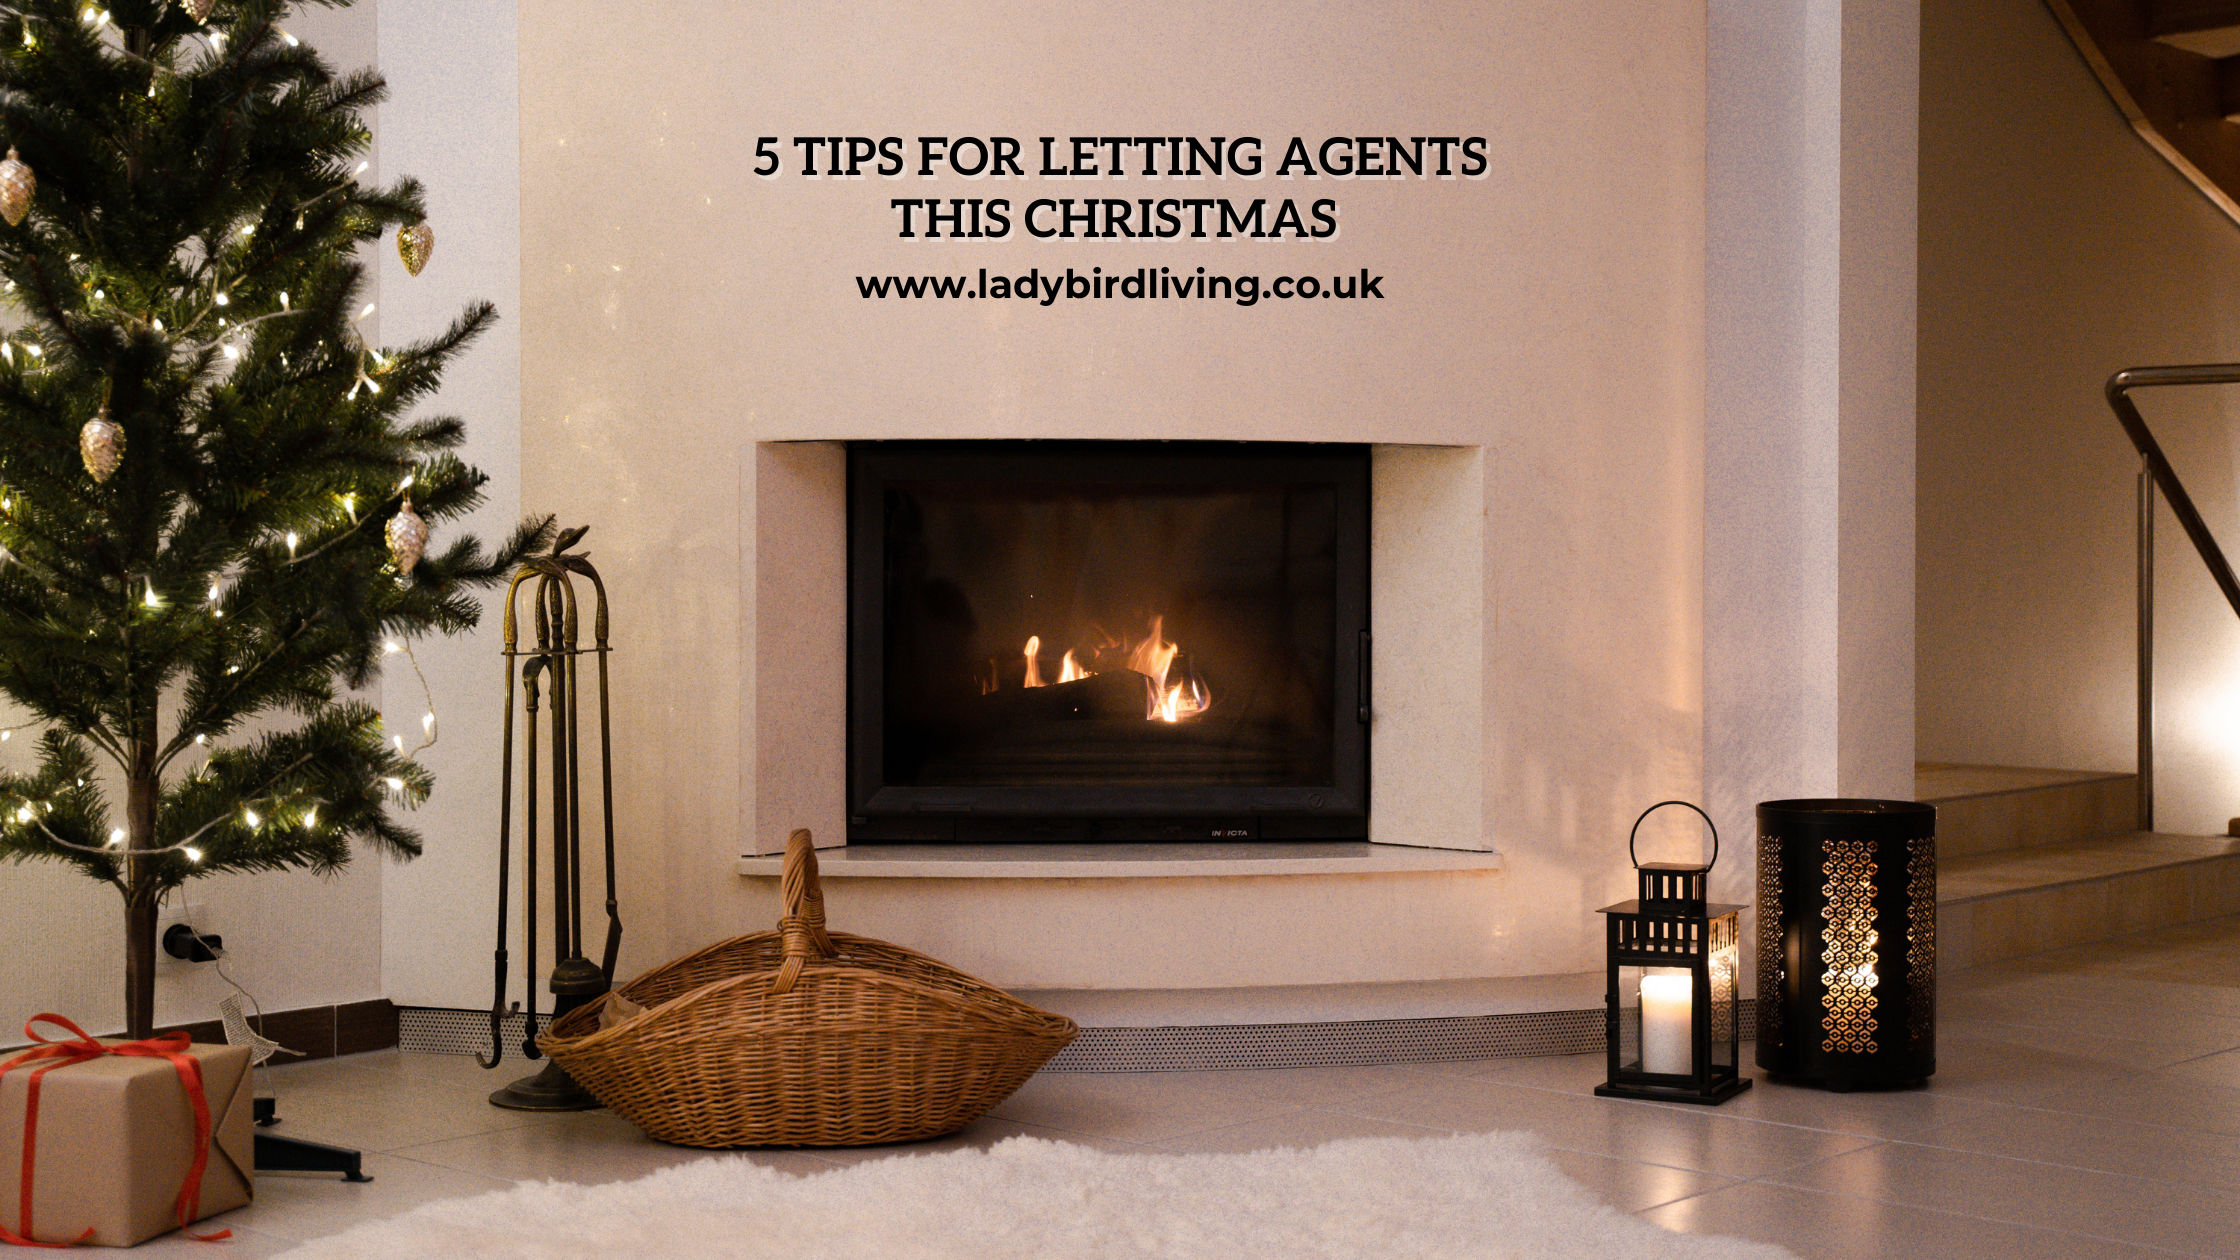 5 tips christmas letting agents